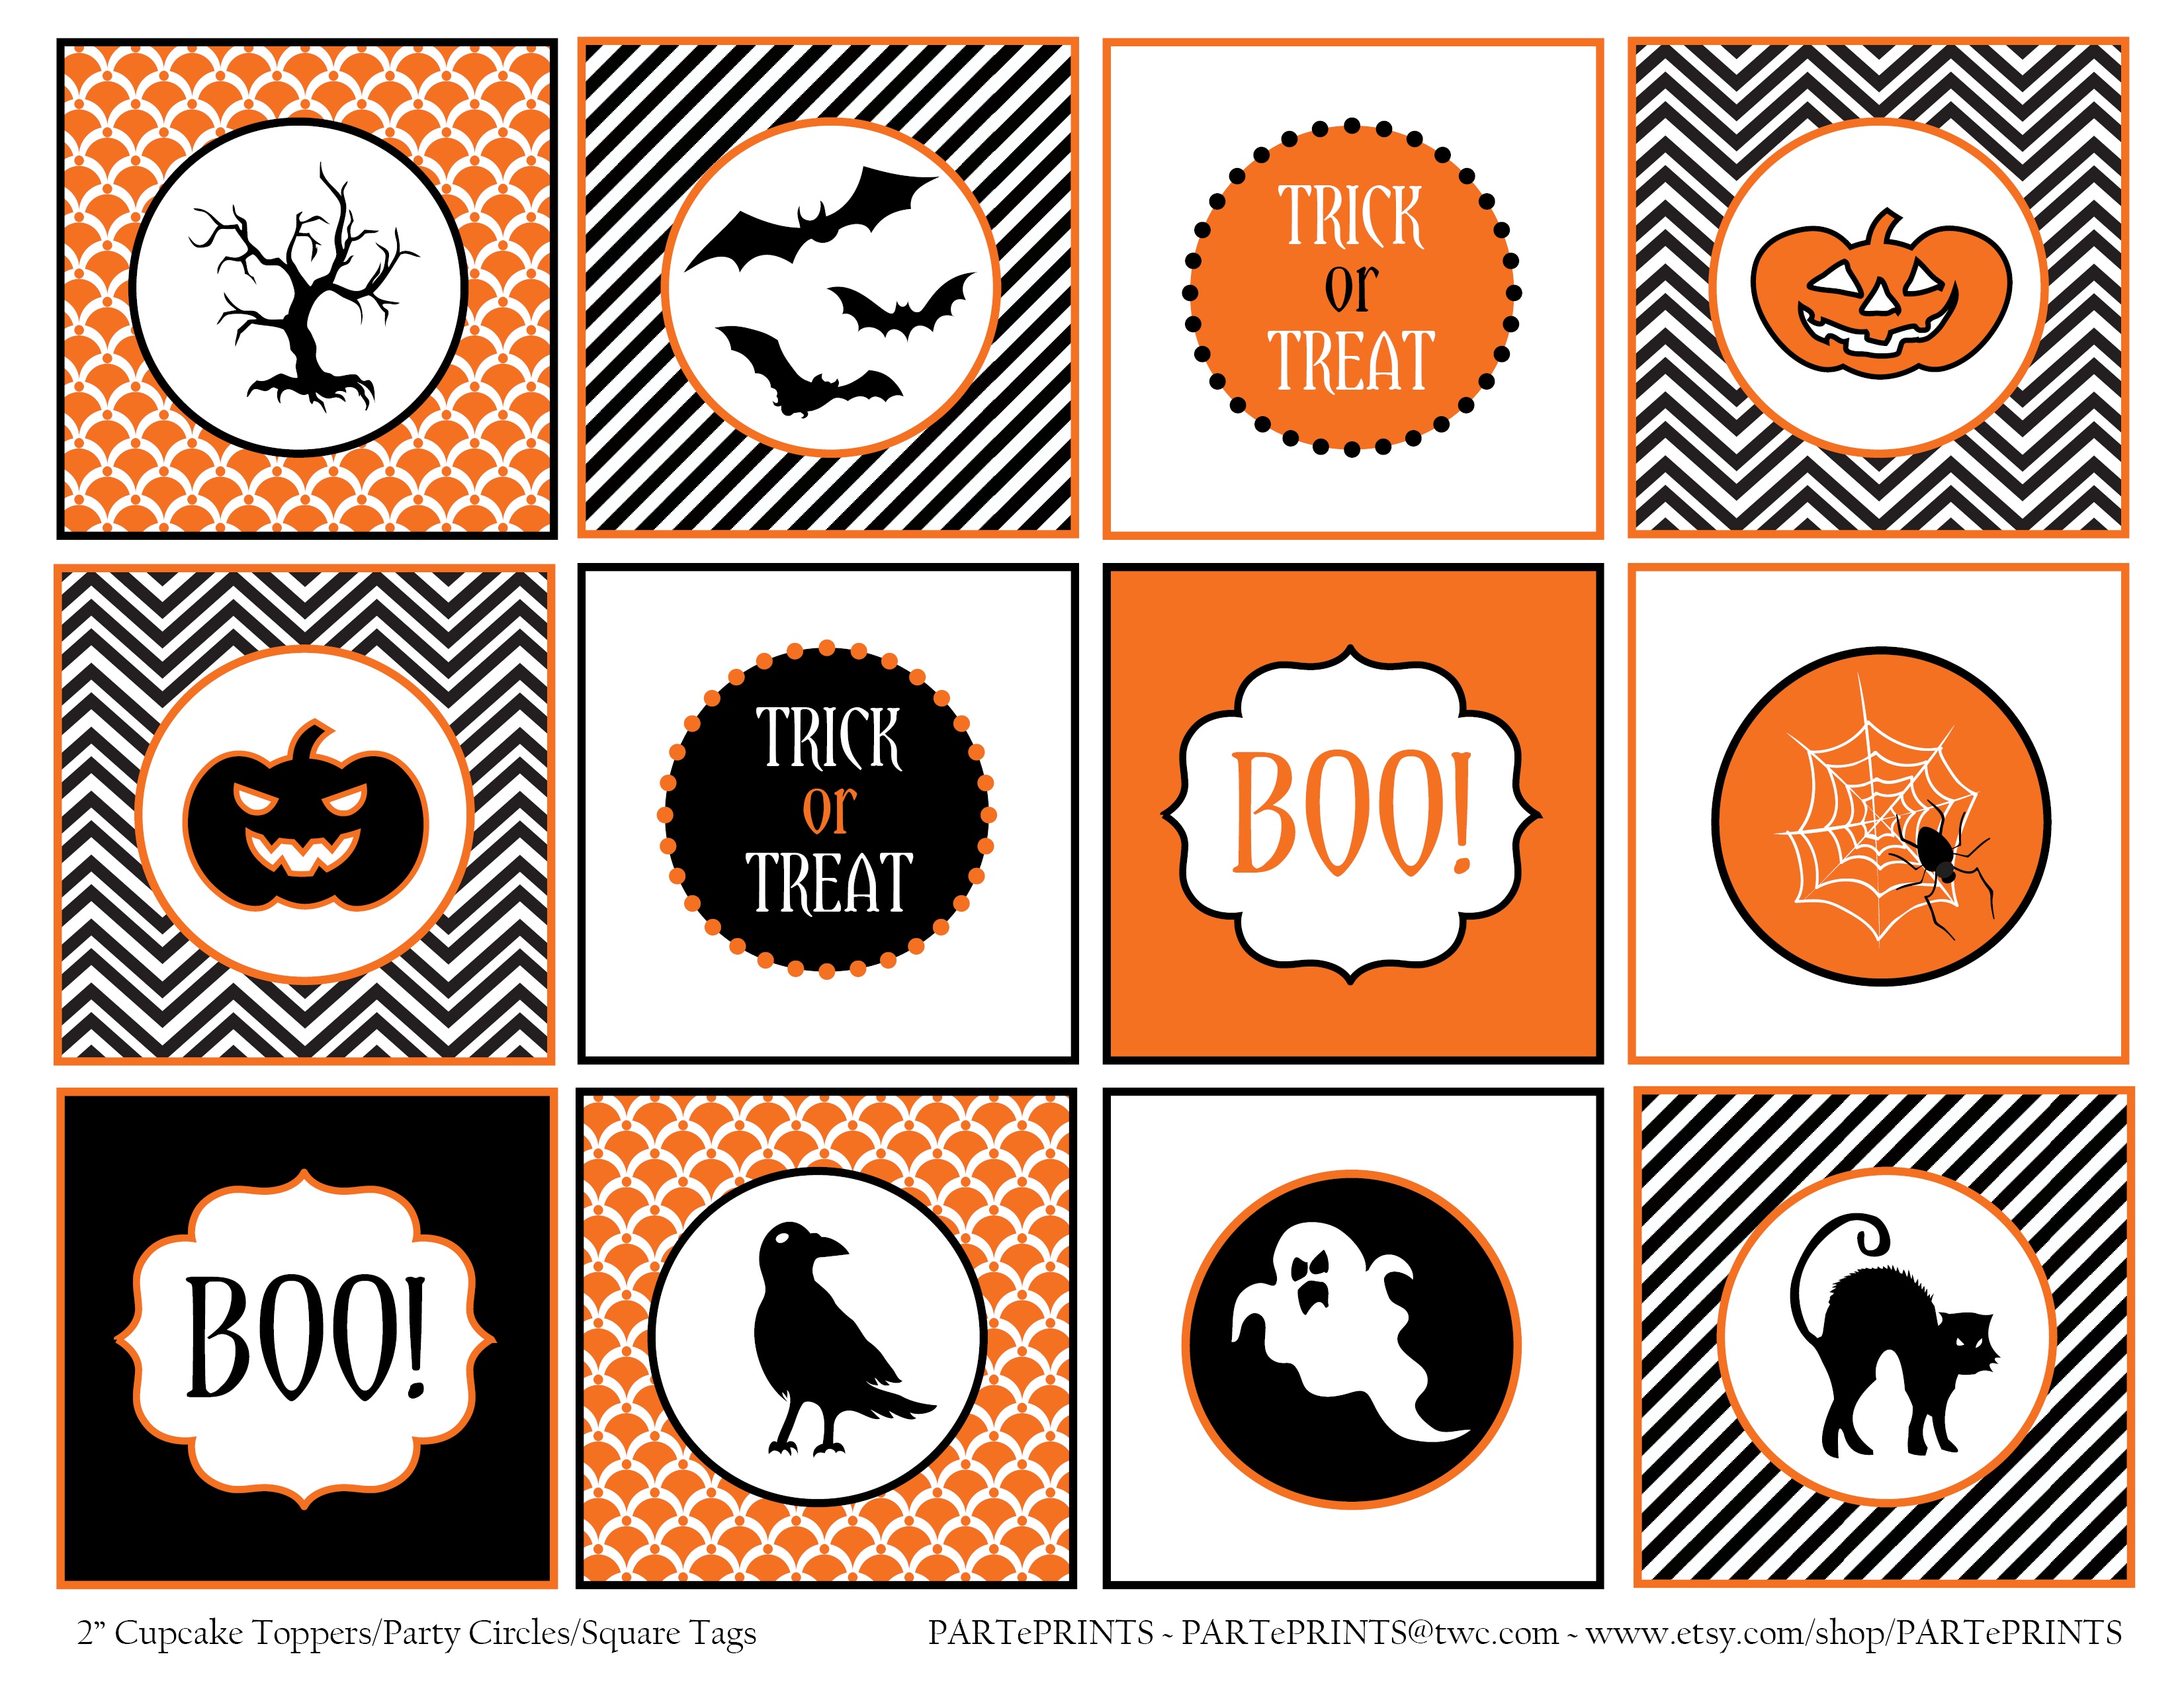 Free Halloween Printables From Parteprints | Catch My Party - Free Halloween Printables